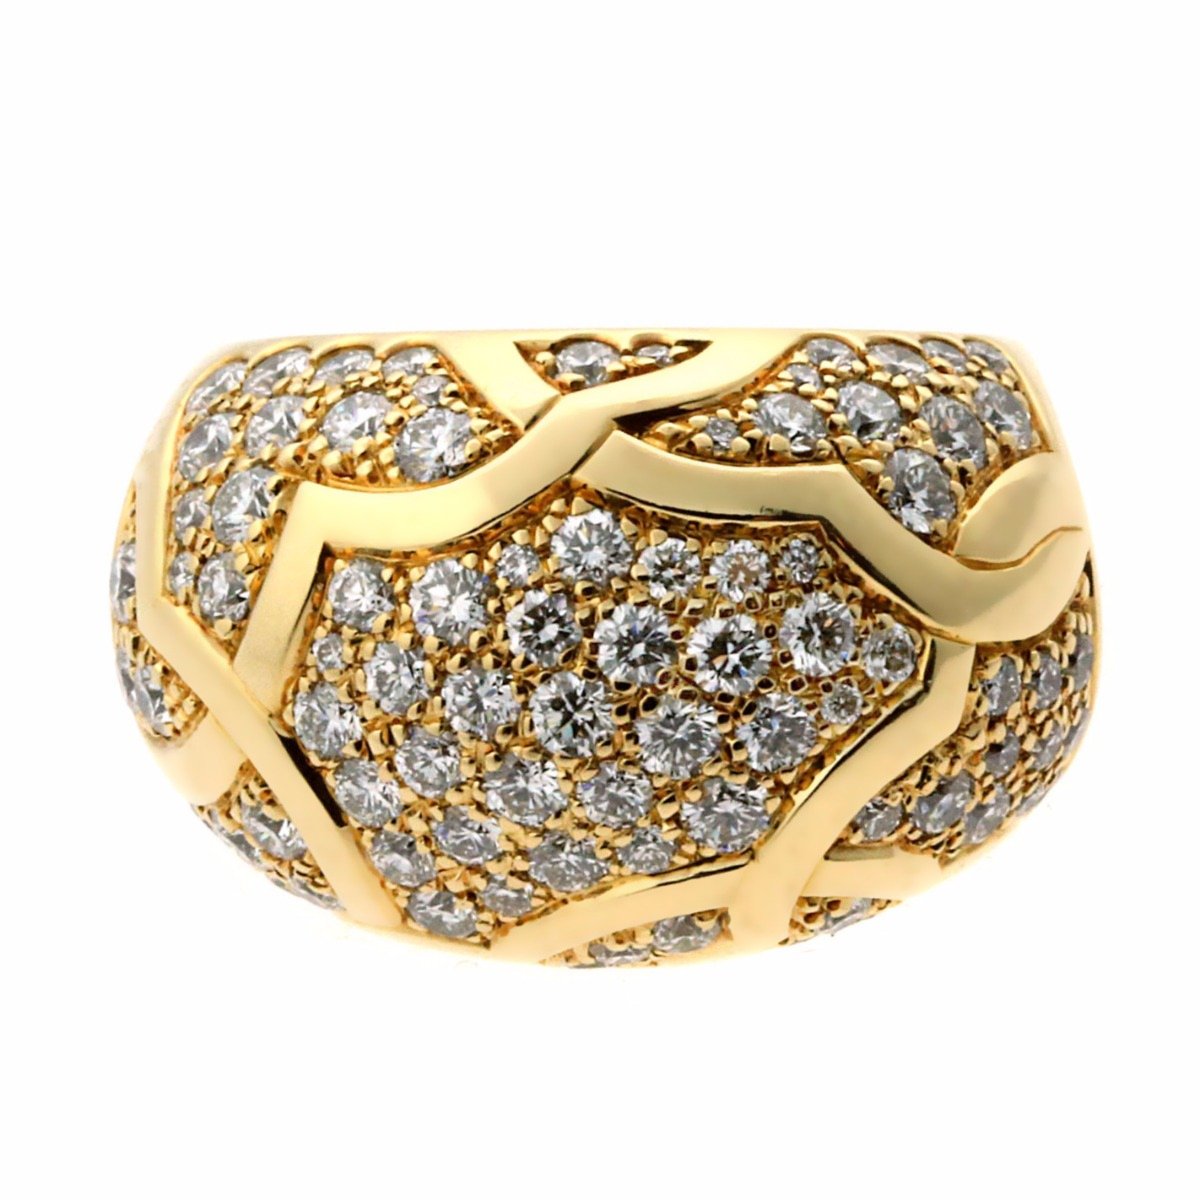 Gold Chanel CC and Camellia Rings Costume Ring – Designer Revival